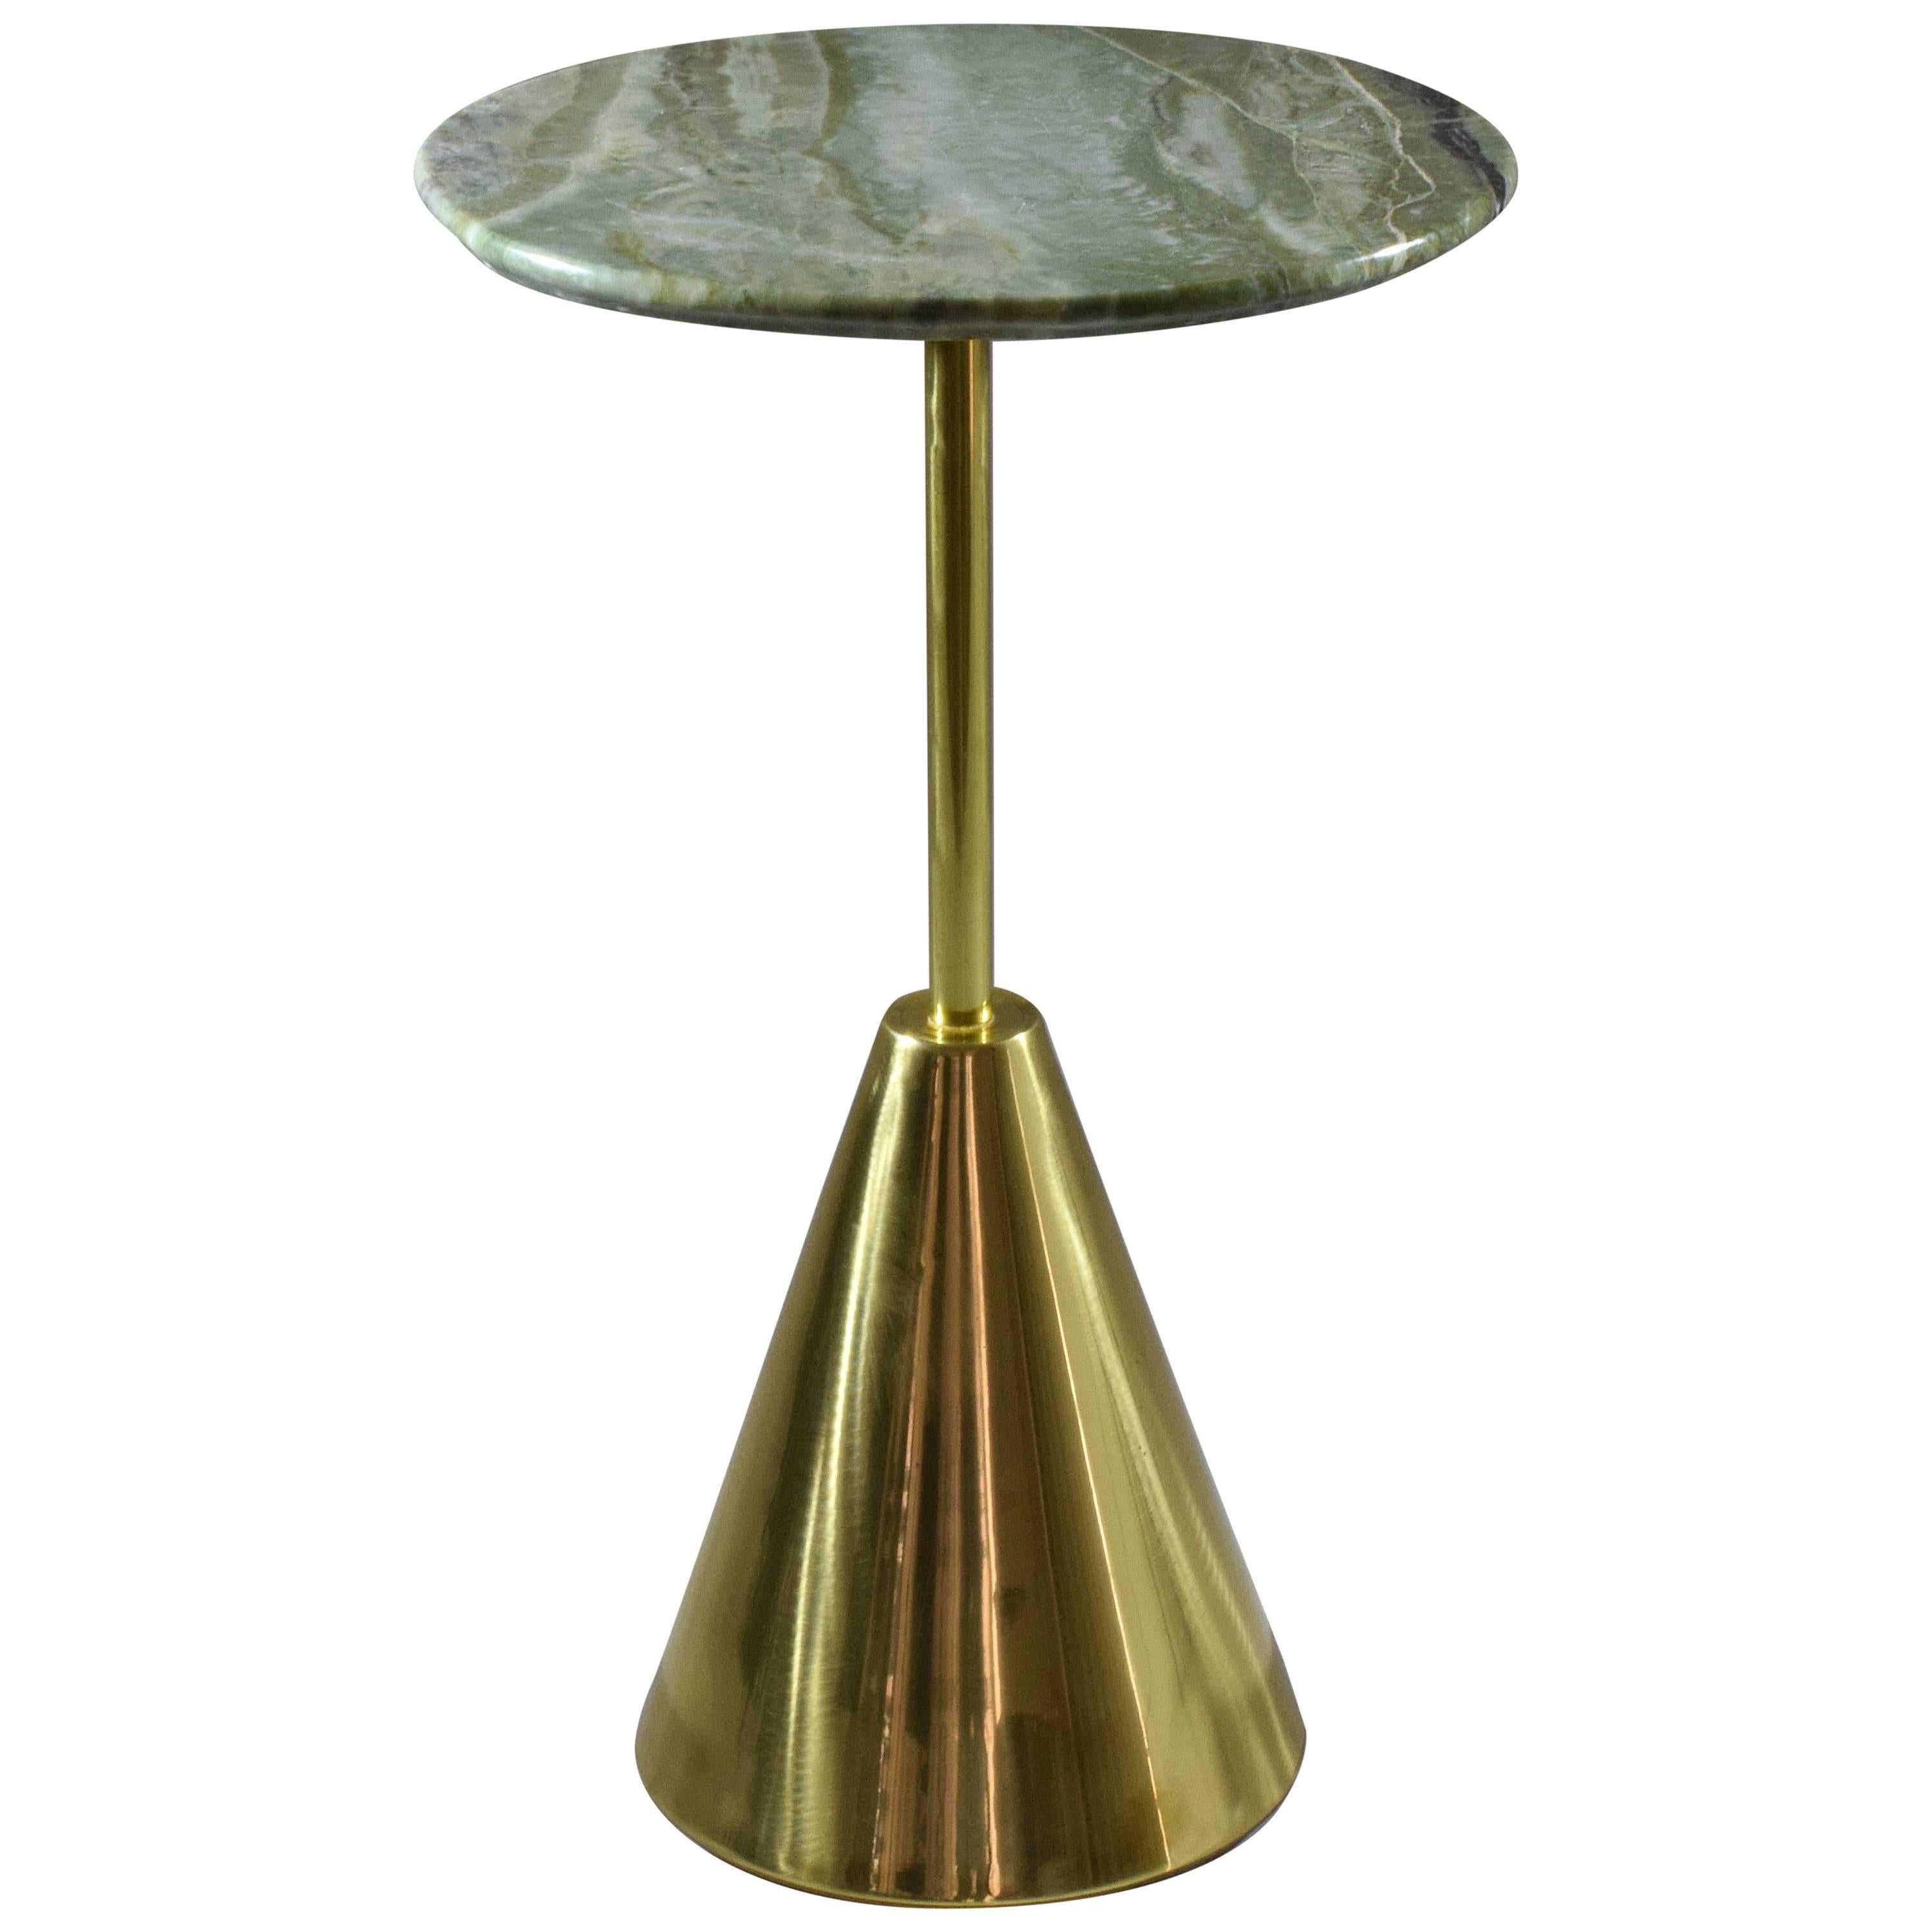 Stone-G Contemporary Handcrafted Brass Marble Side Table, Flow Collection 5